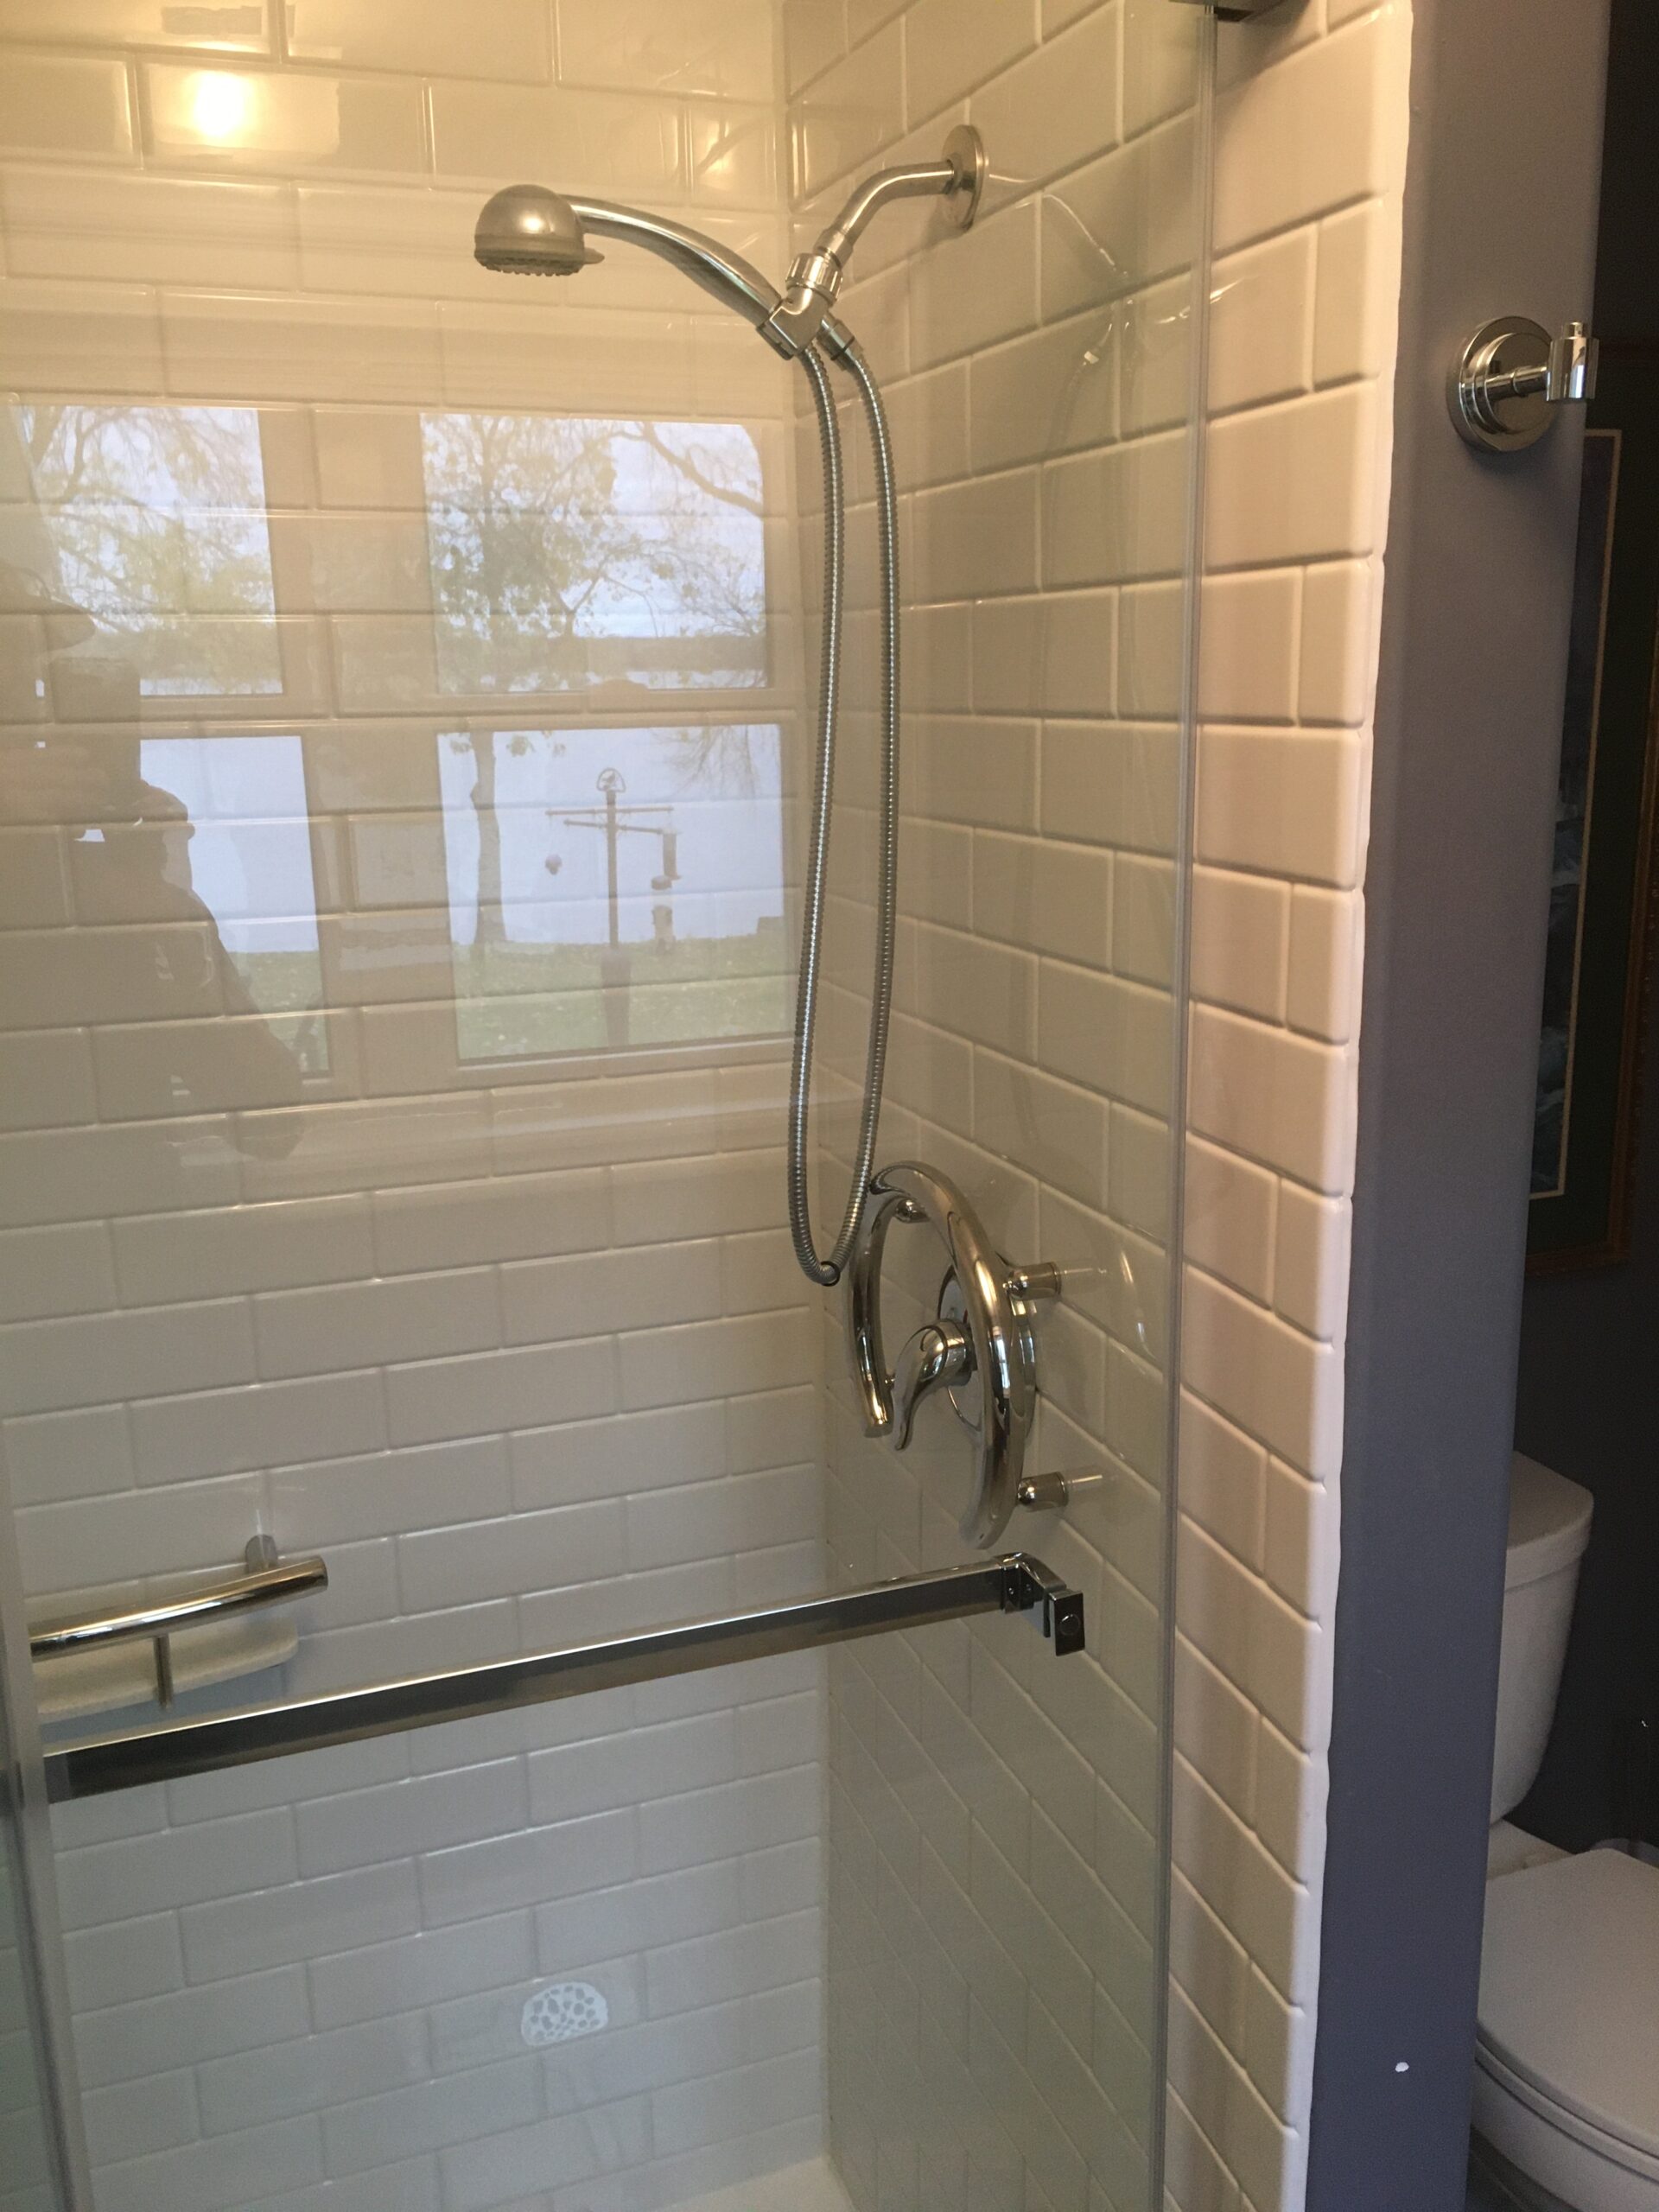 After image of a new acrylic shower with subway tile design and glass doors, highlighting bathroom remodeling and shower installation.